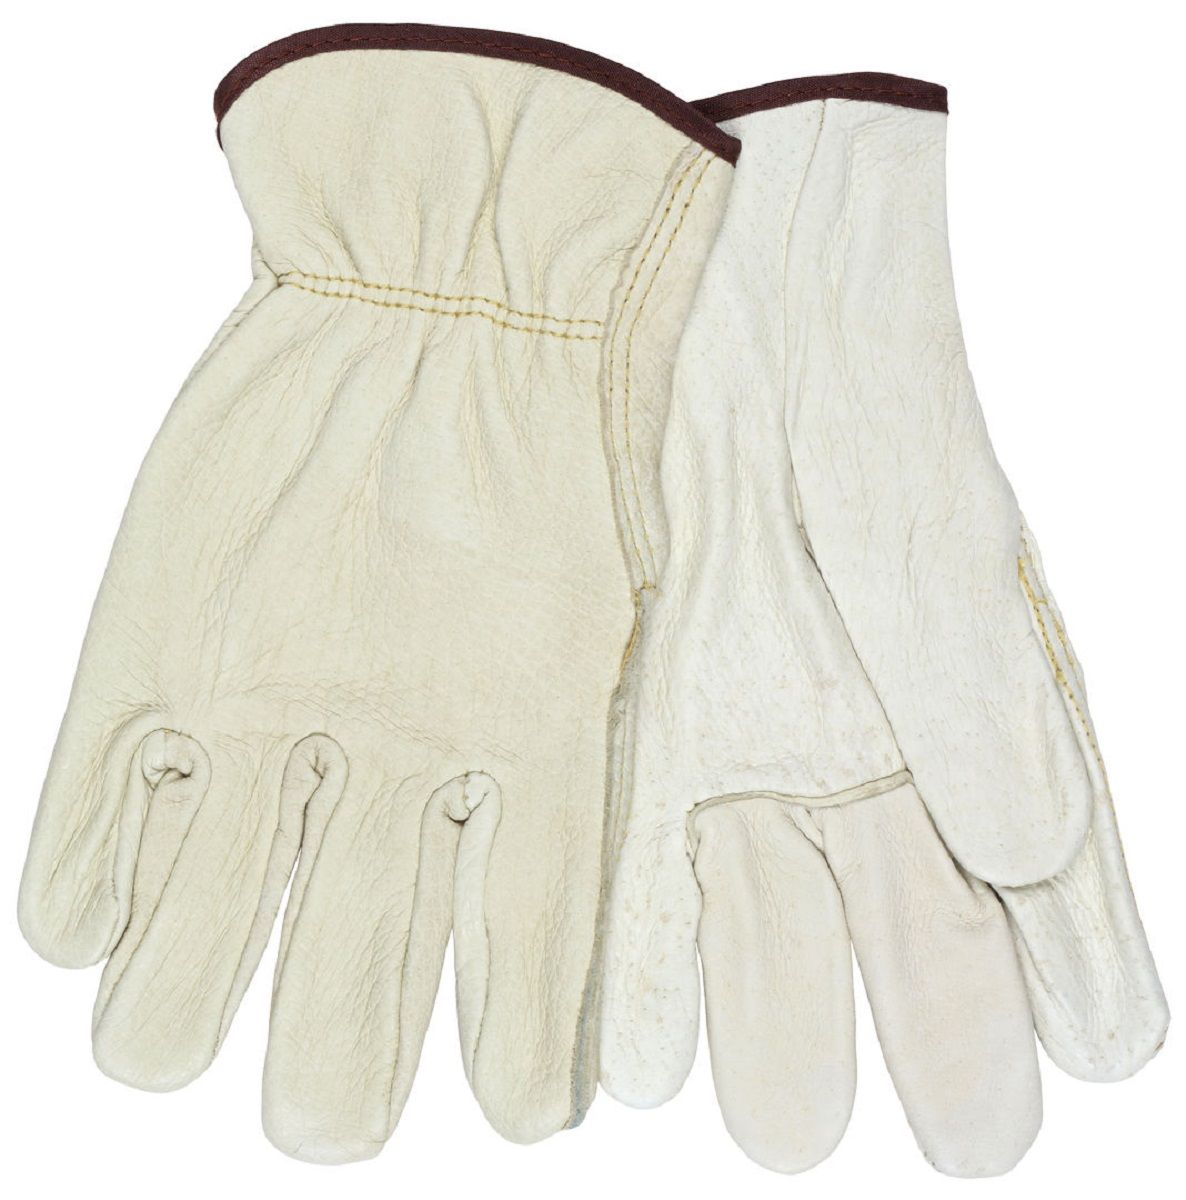 MCR Safety 3400 Unlined Grain Pigskin Leather, Drivers Work Gloves, Beige, Box of 12 Pairs